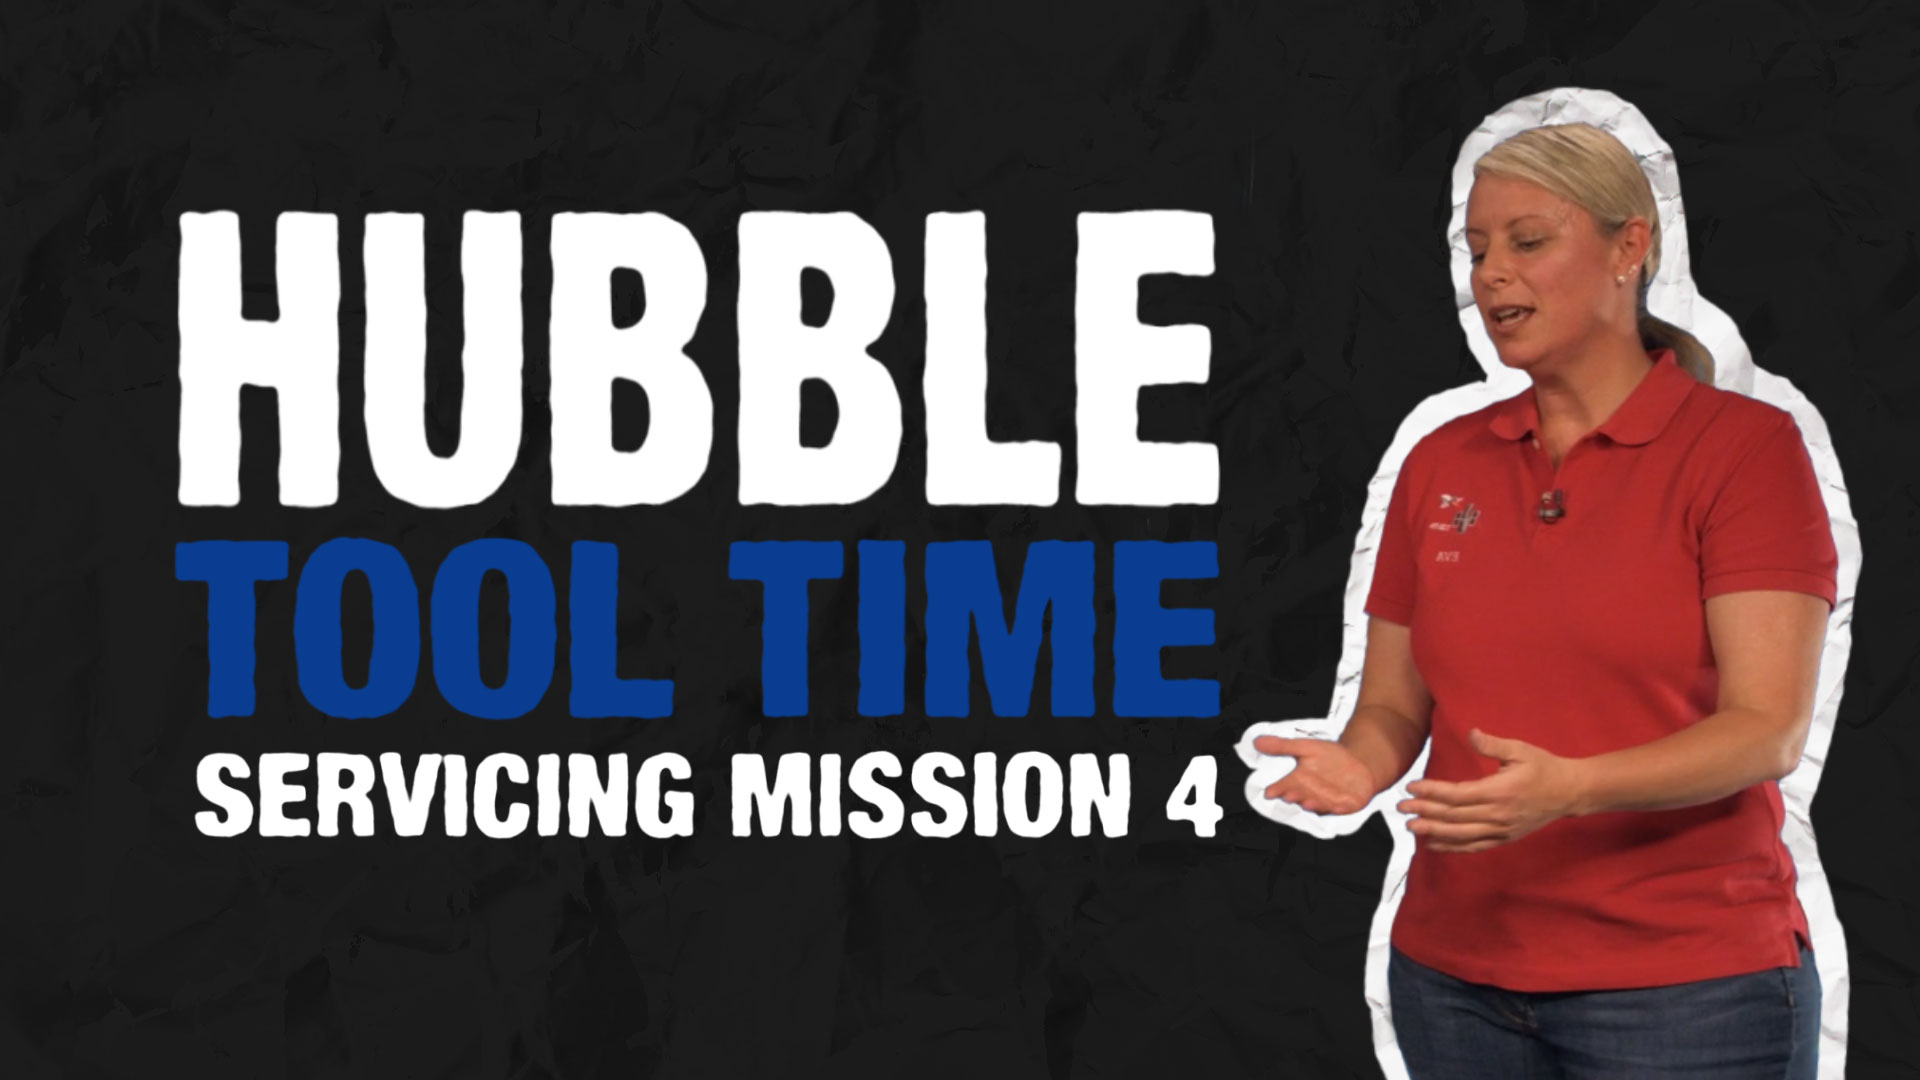 Preview Image for Hubble Tool Time Episode 6 - Servicing Mission 4